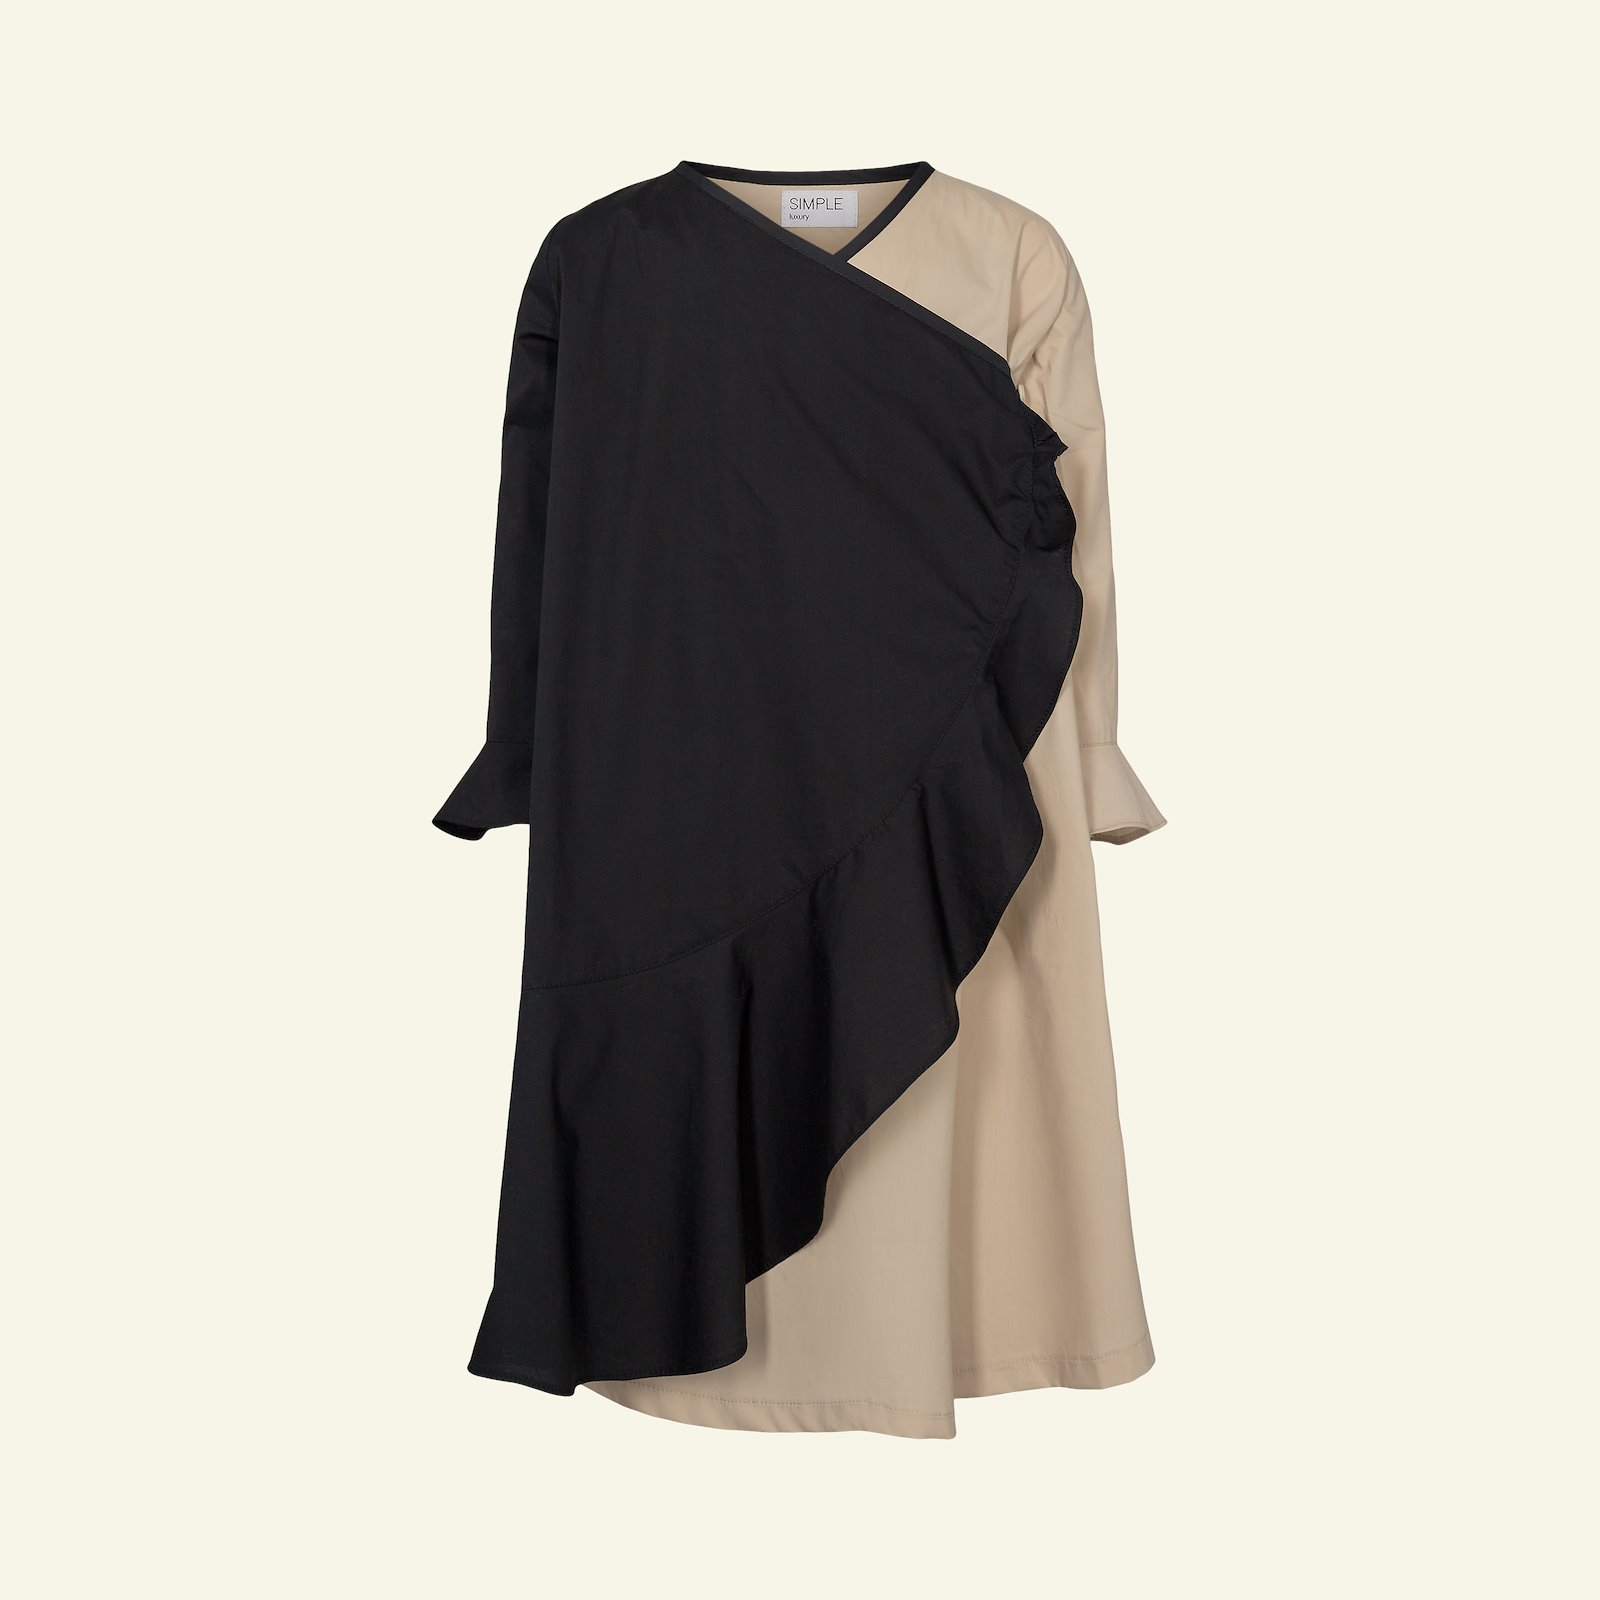 Dress und blouse with flounce, 164/14y p63066_540110_510112_64080_24865_sskit